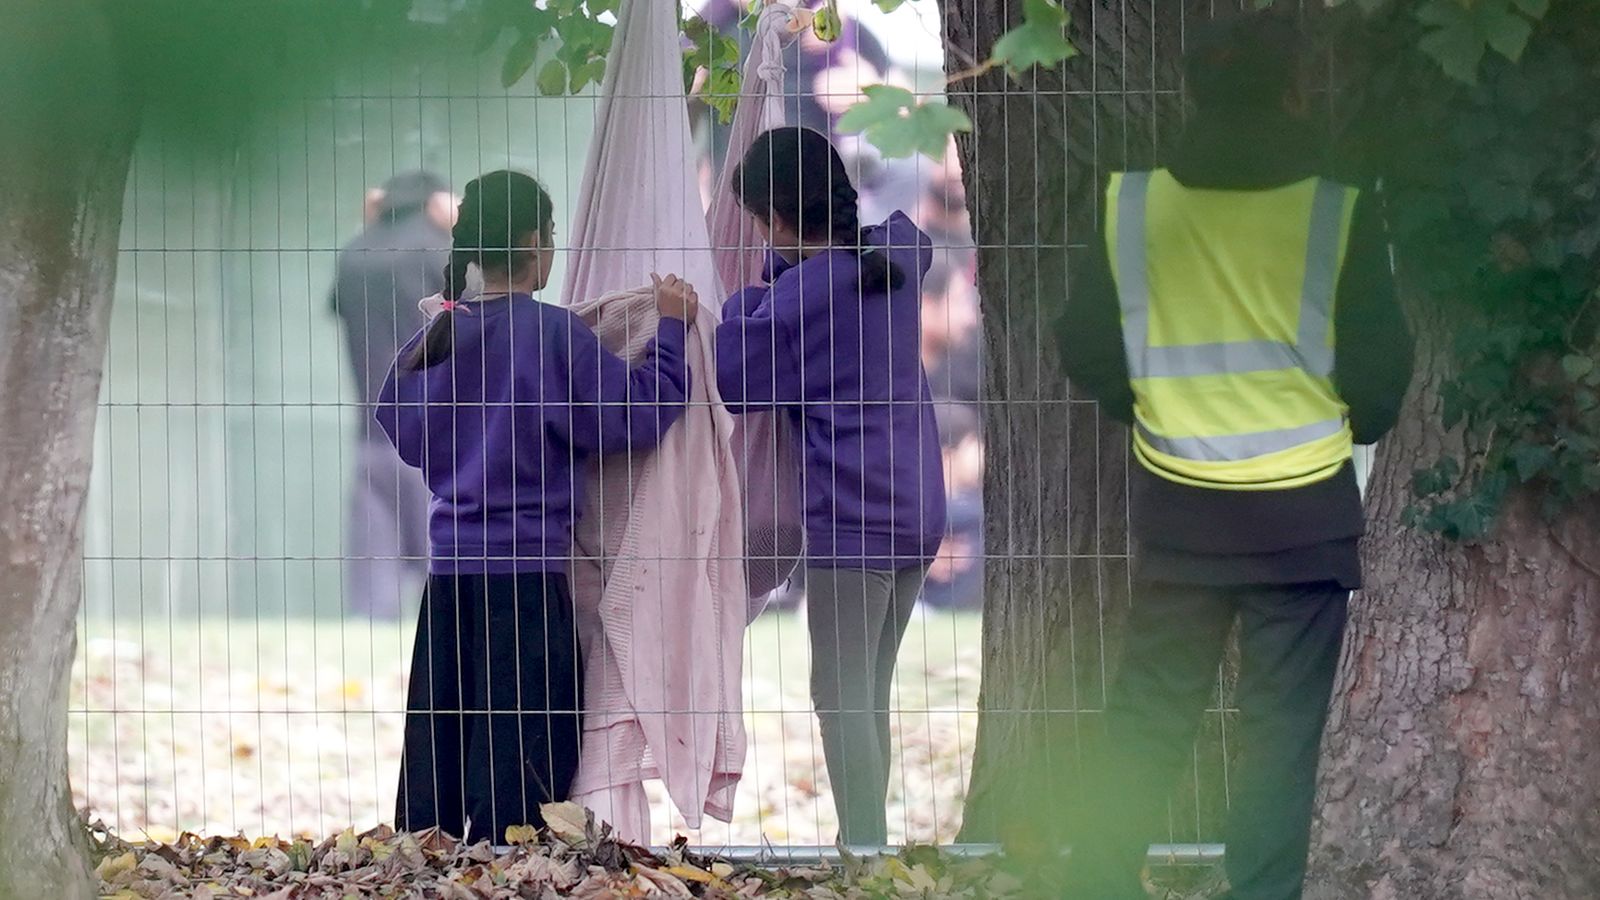 Migrants moved from overcrowded centre - as figures show 222 children put in hotels are missing